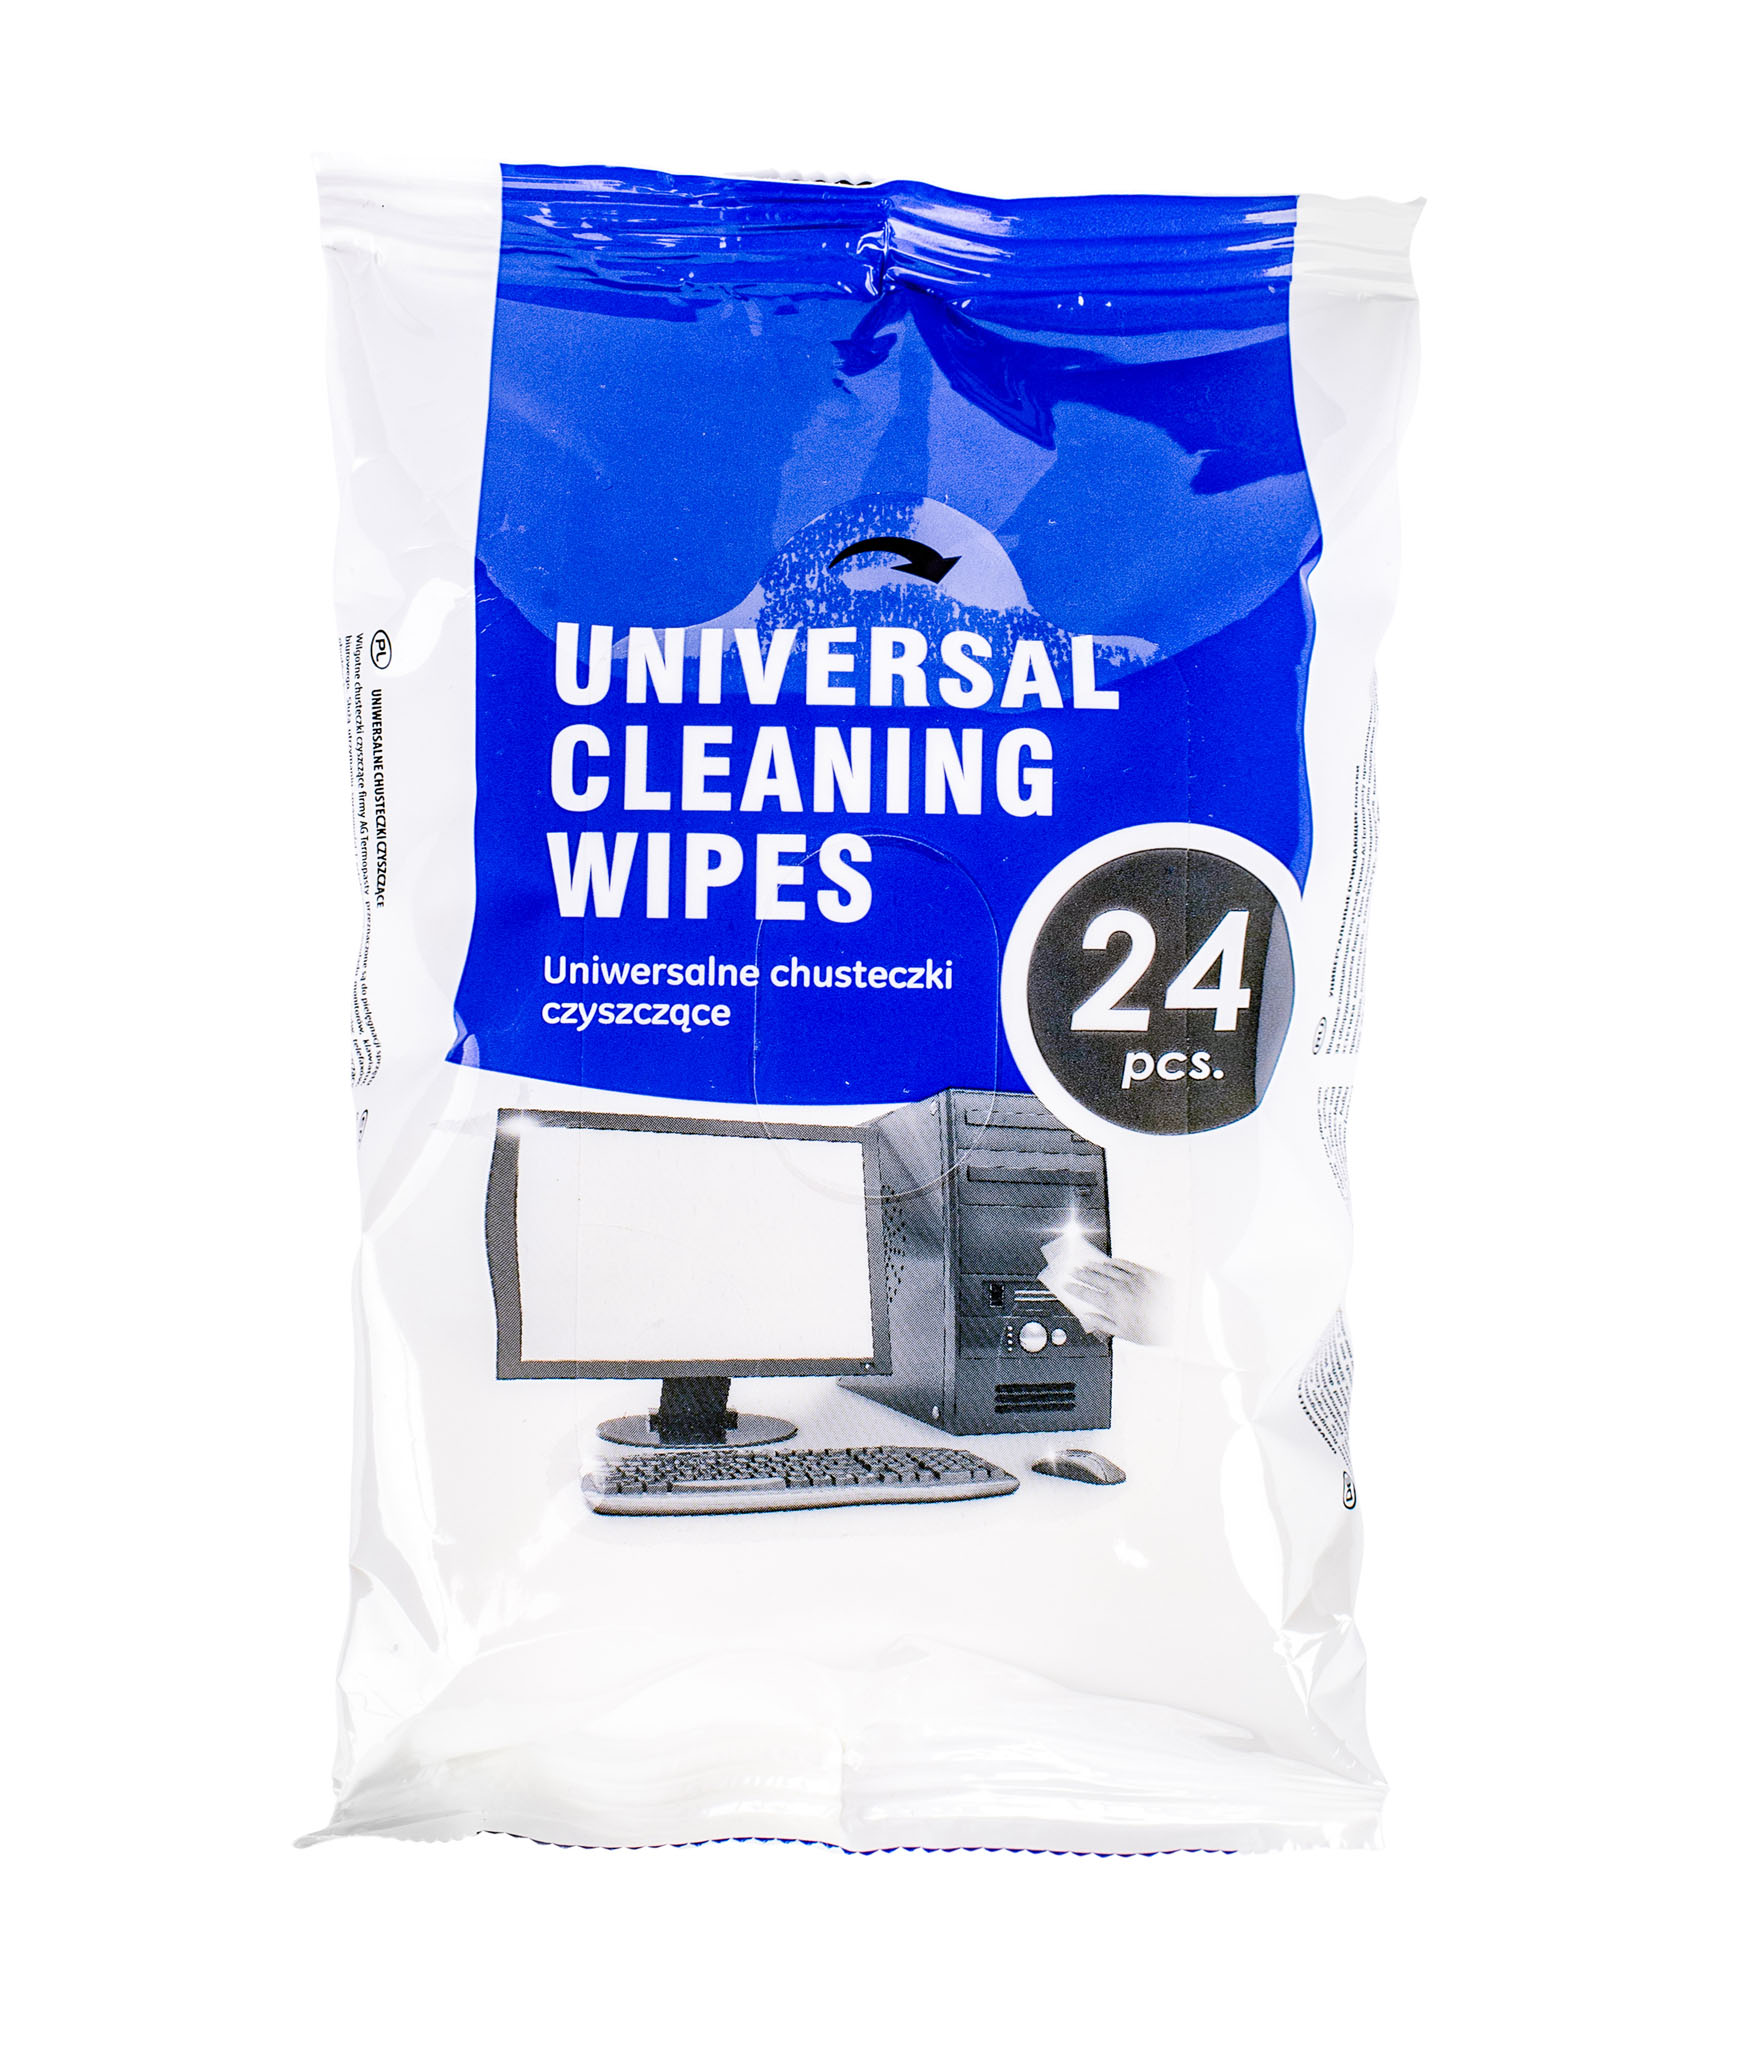 universal-cleaning-wipes-1.jpg